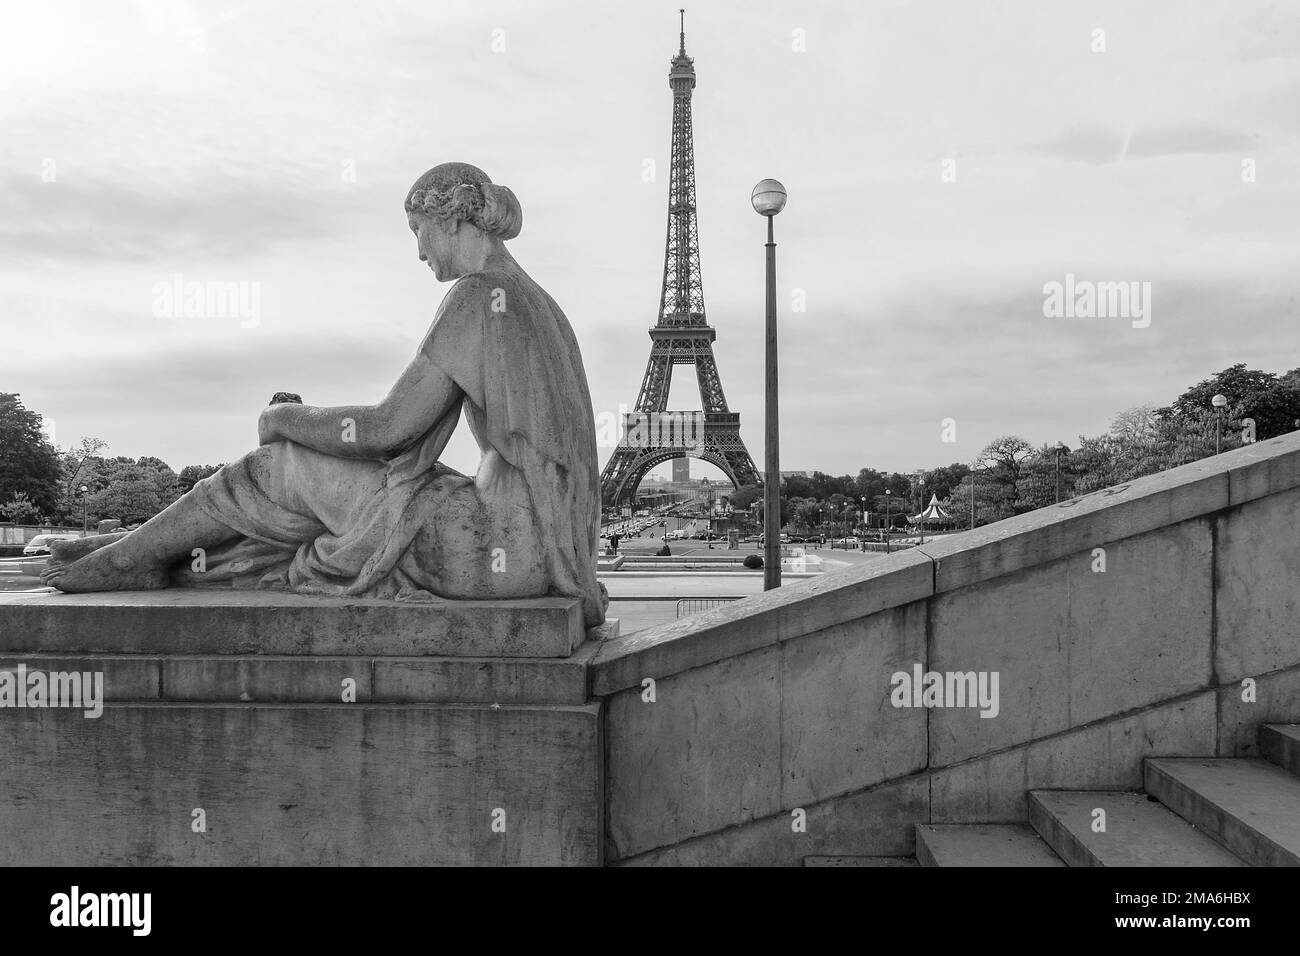 PARIS, FRANCE - MAY 12, 2015: This is one of the sculptures located on the Trocadero at the Palais de Chaillot. Stock Photo